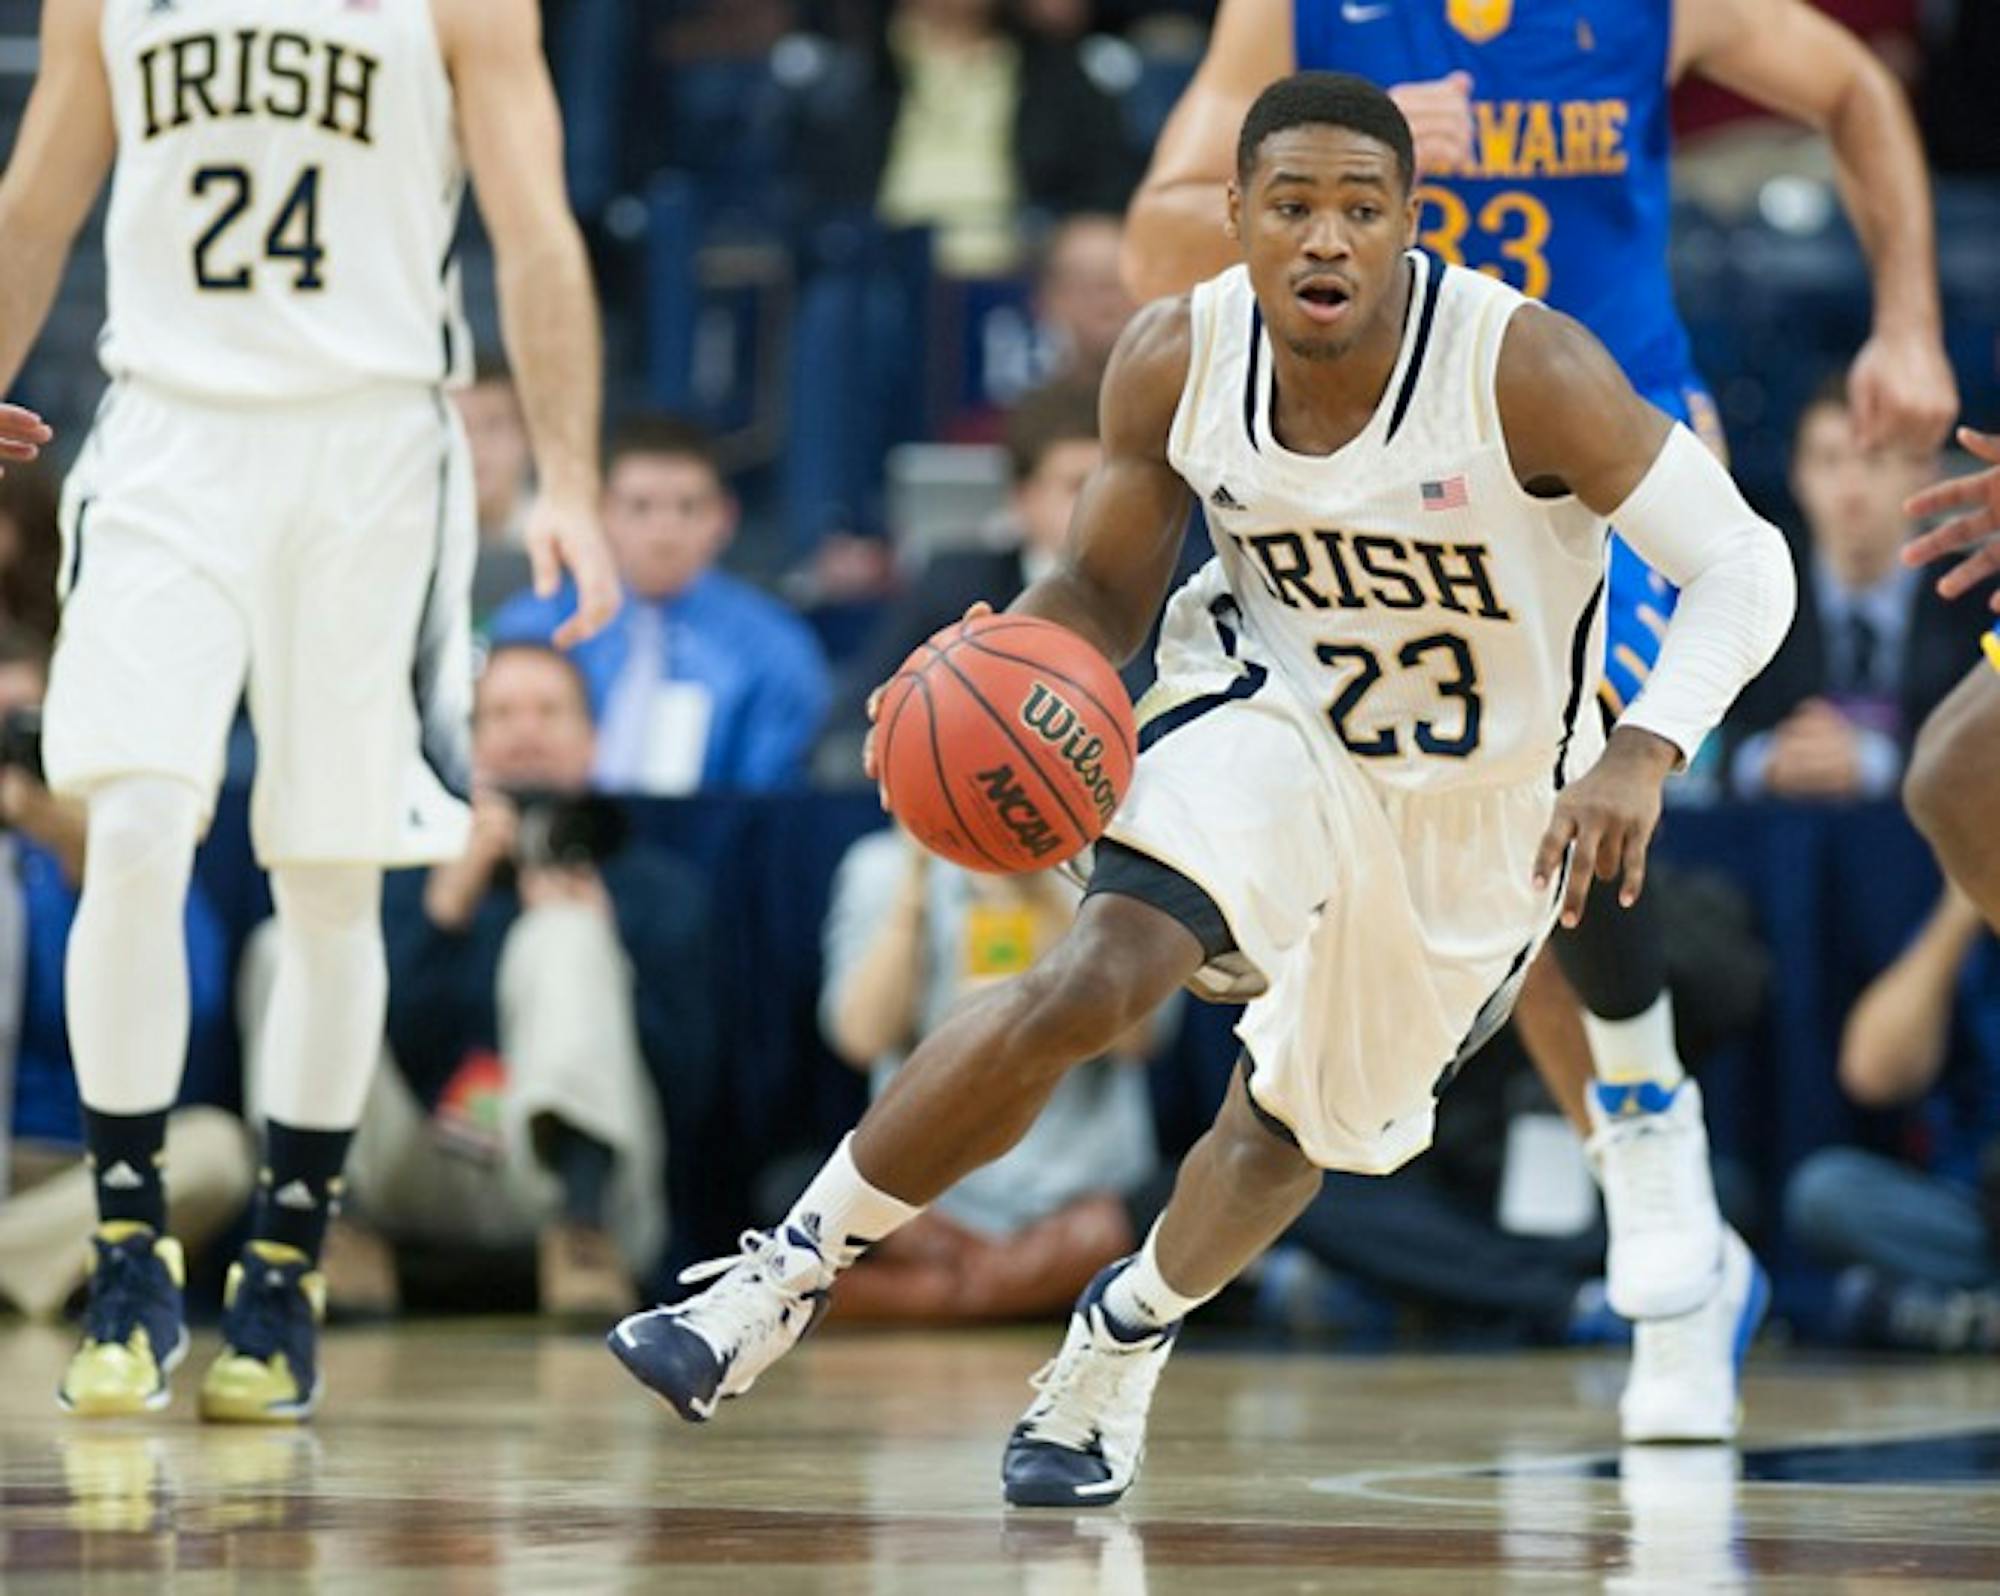 Irish freshman guard Demetrius Jackson dribbles the ball during Notre Dame’s 80-75 victory over Delaware in the Purcell Pavilion on Dec. 7. Jackson had six points and three assists during Wednesday’s loss to Maryland.